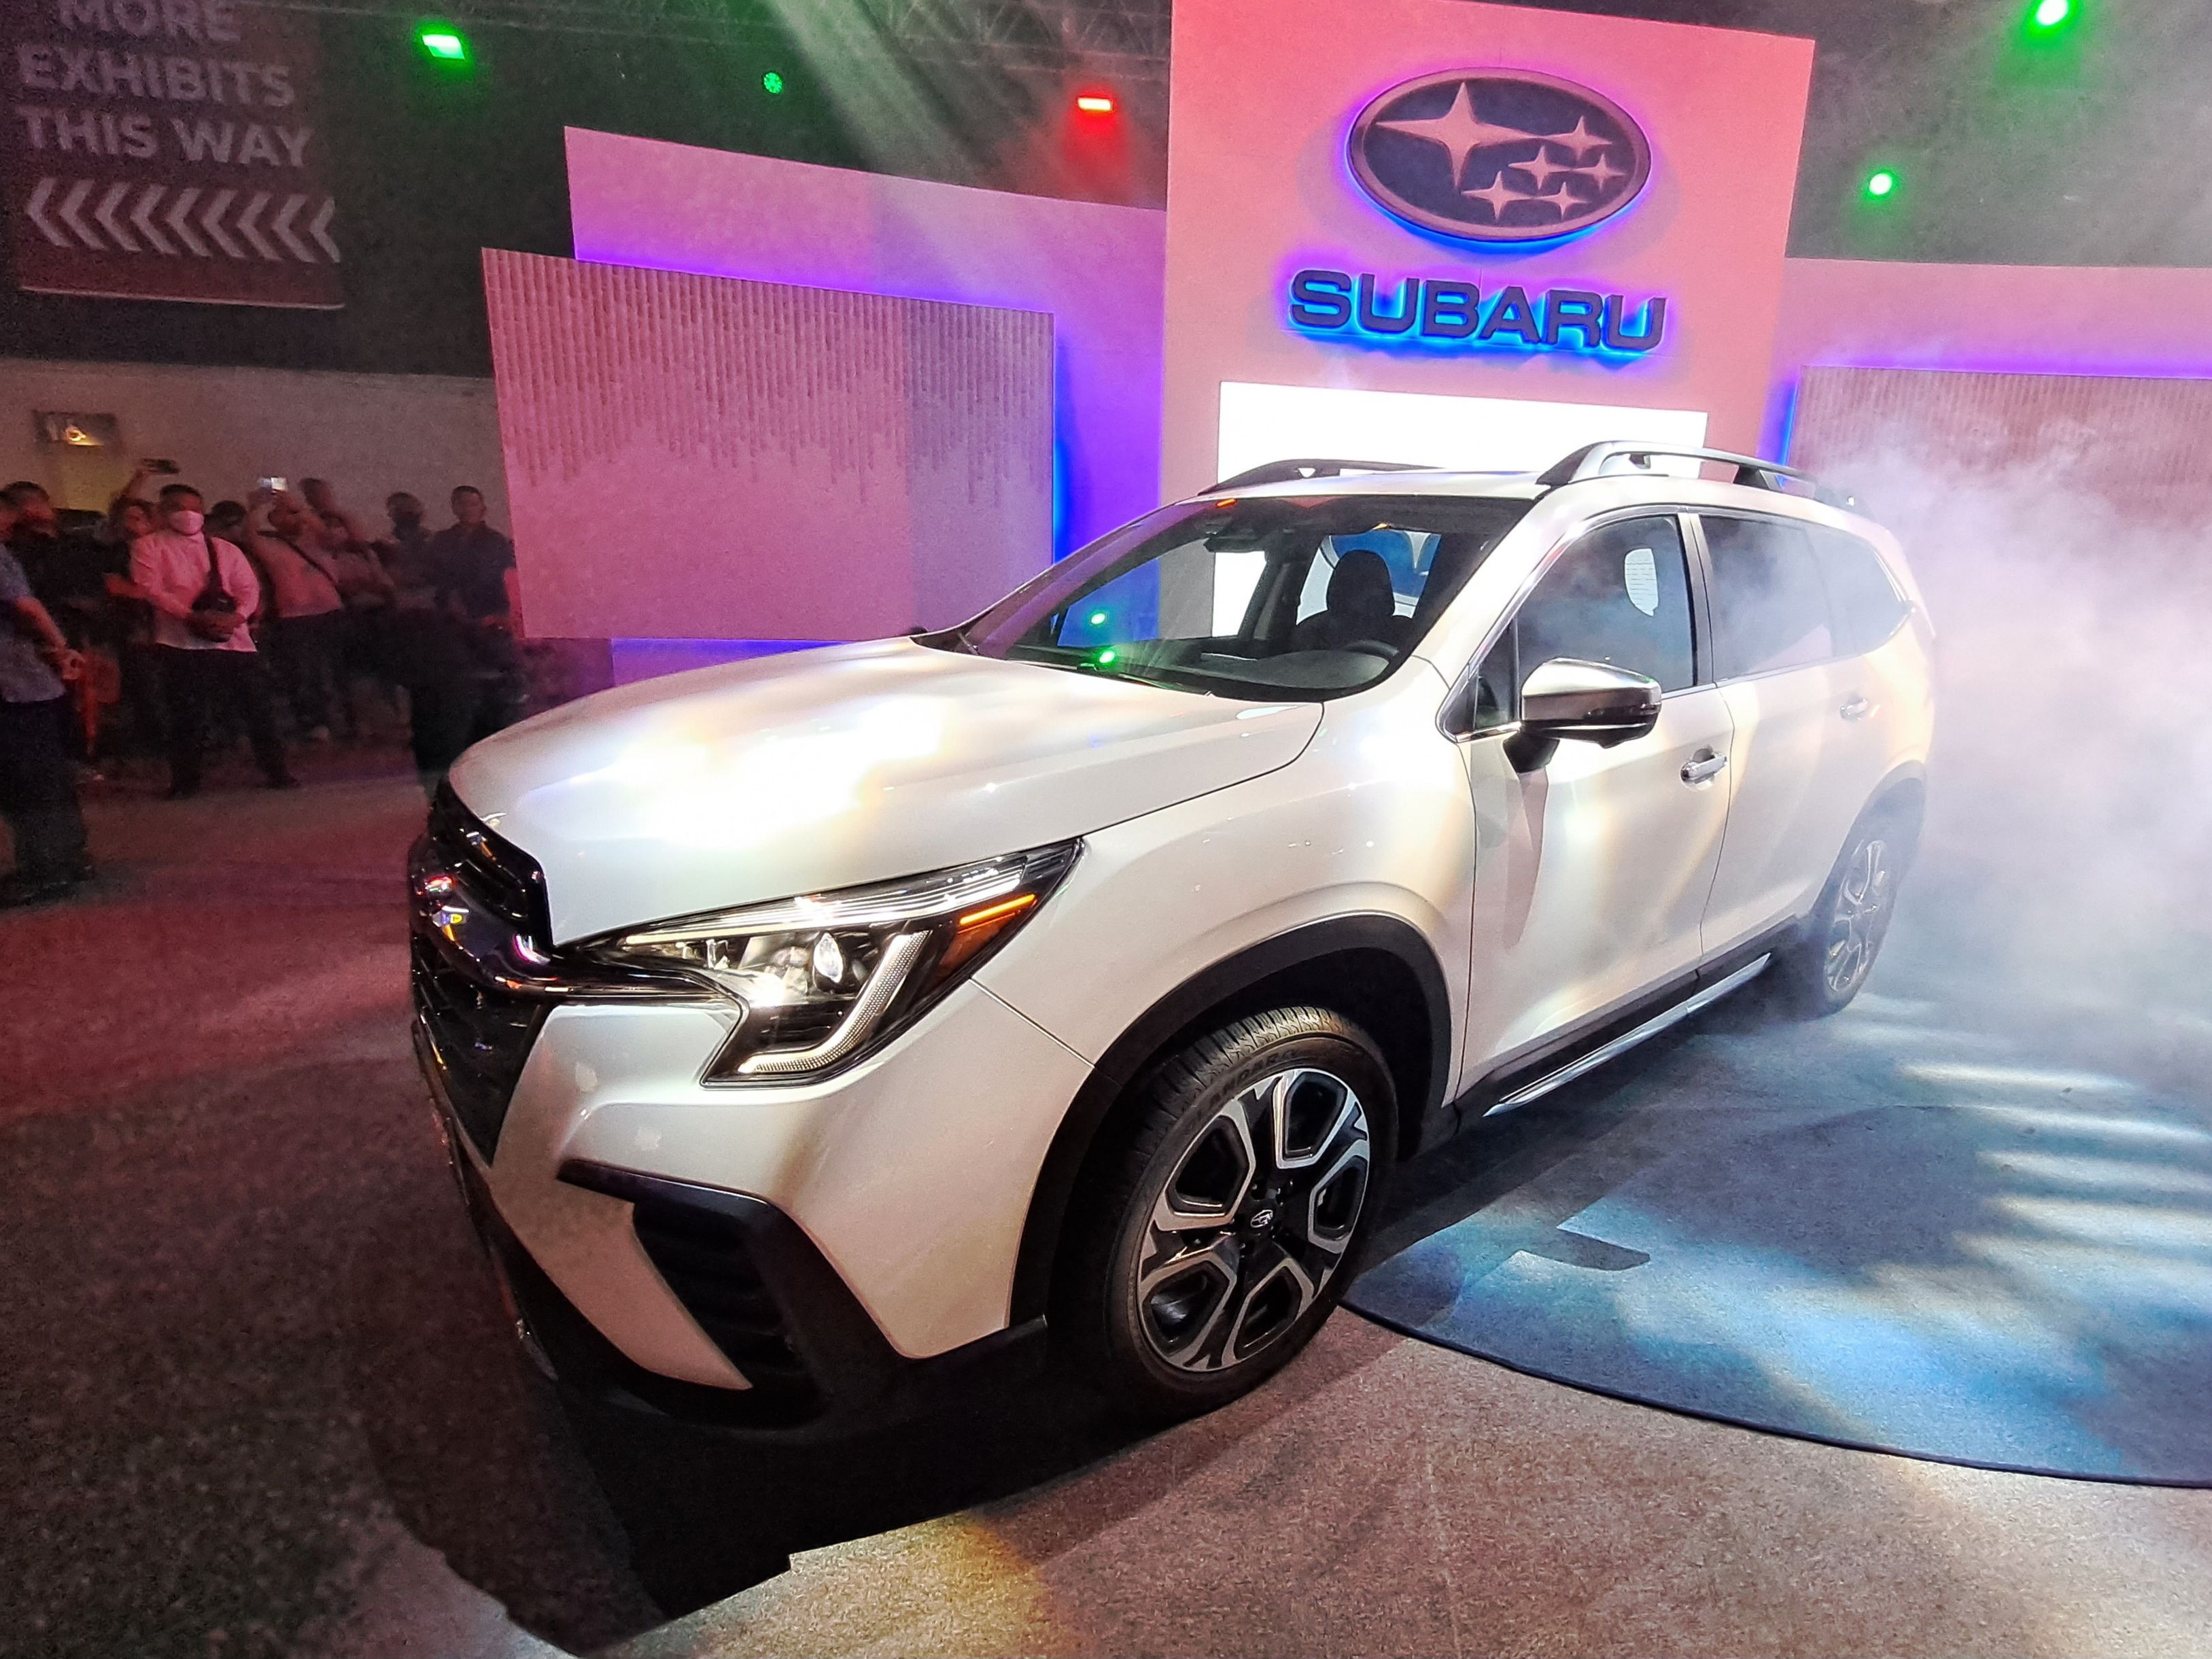 MIAS 2023: New Subaru Evoltis, Outback, Forester GT Edition unveiled 